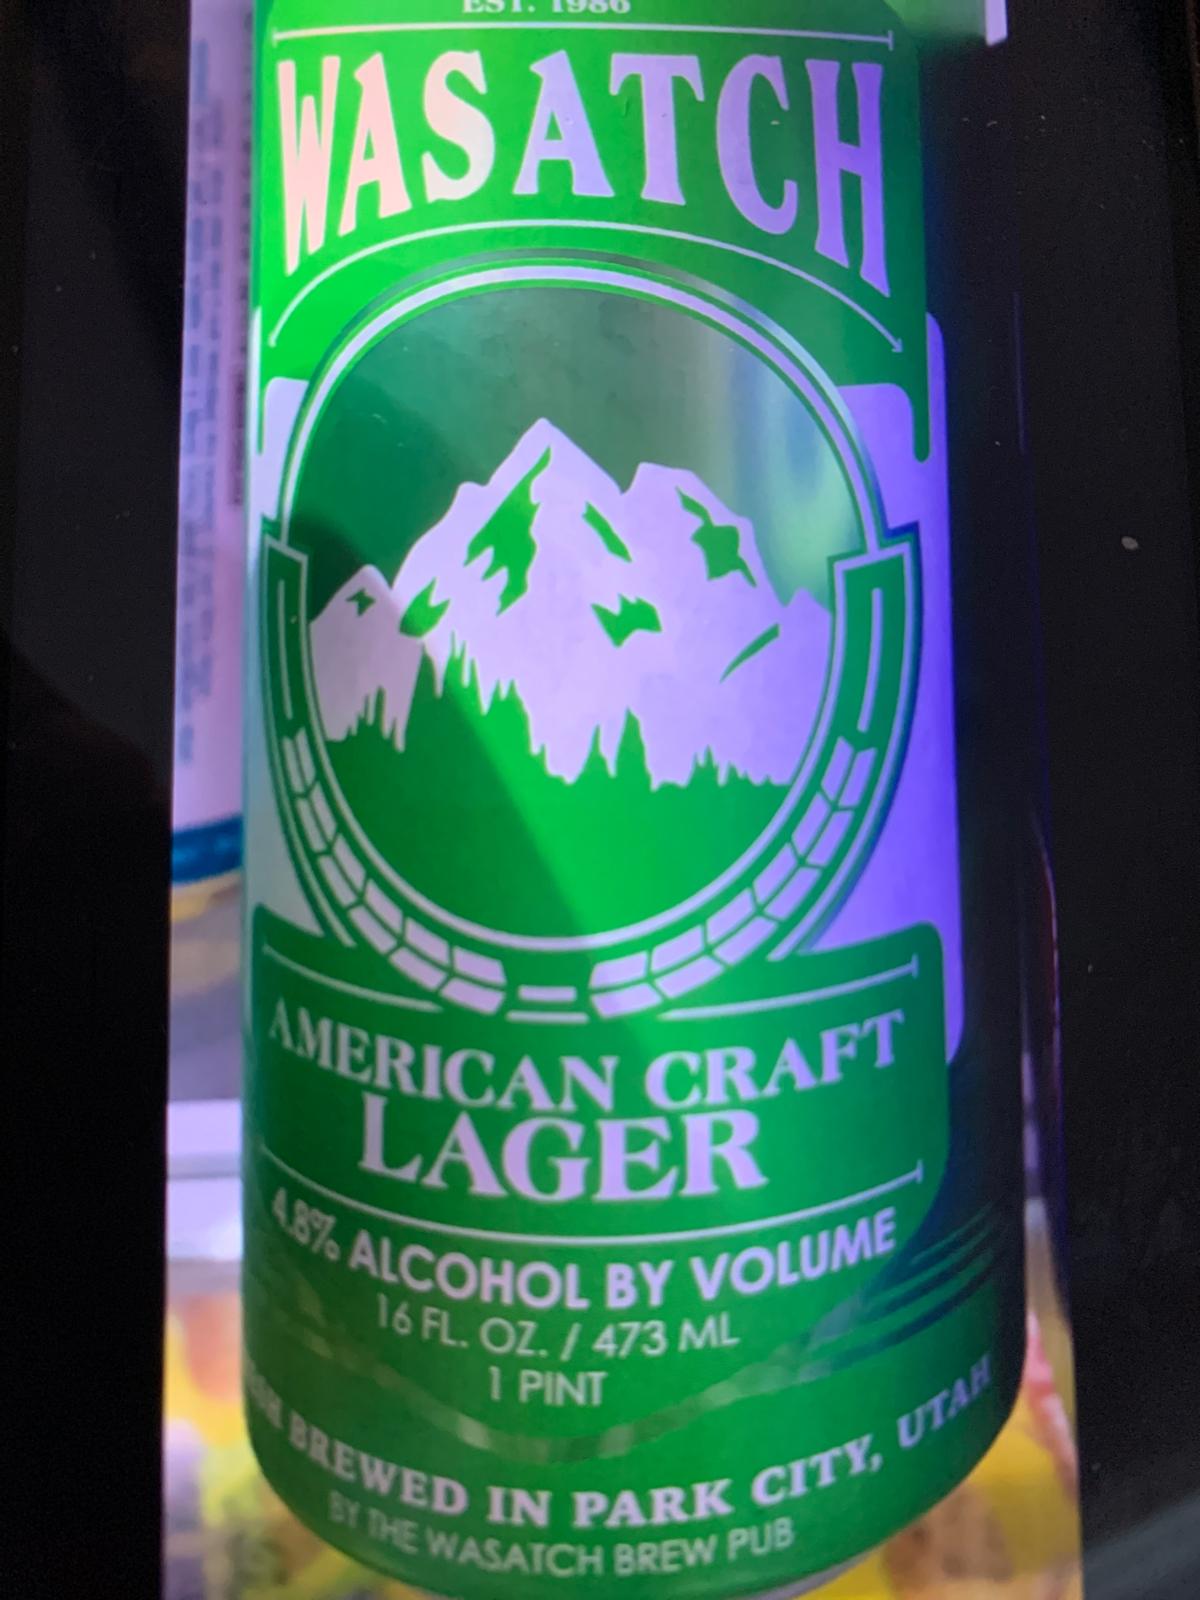 American Craft Lager